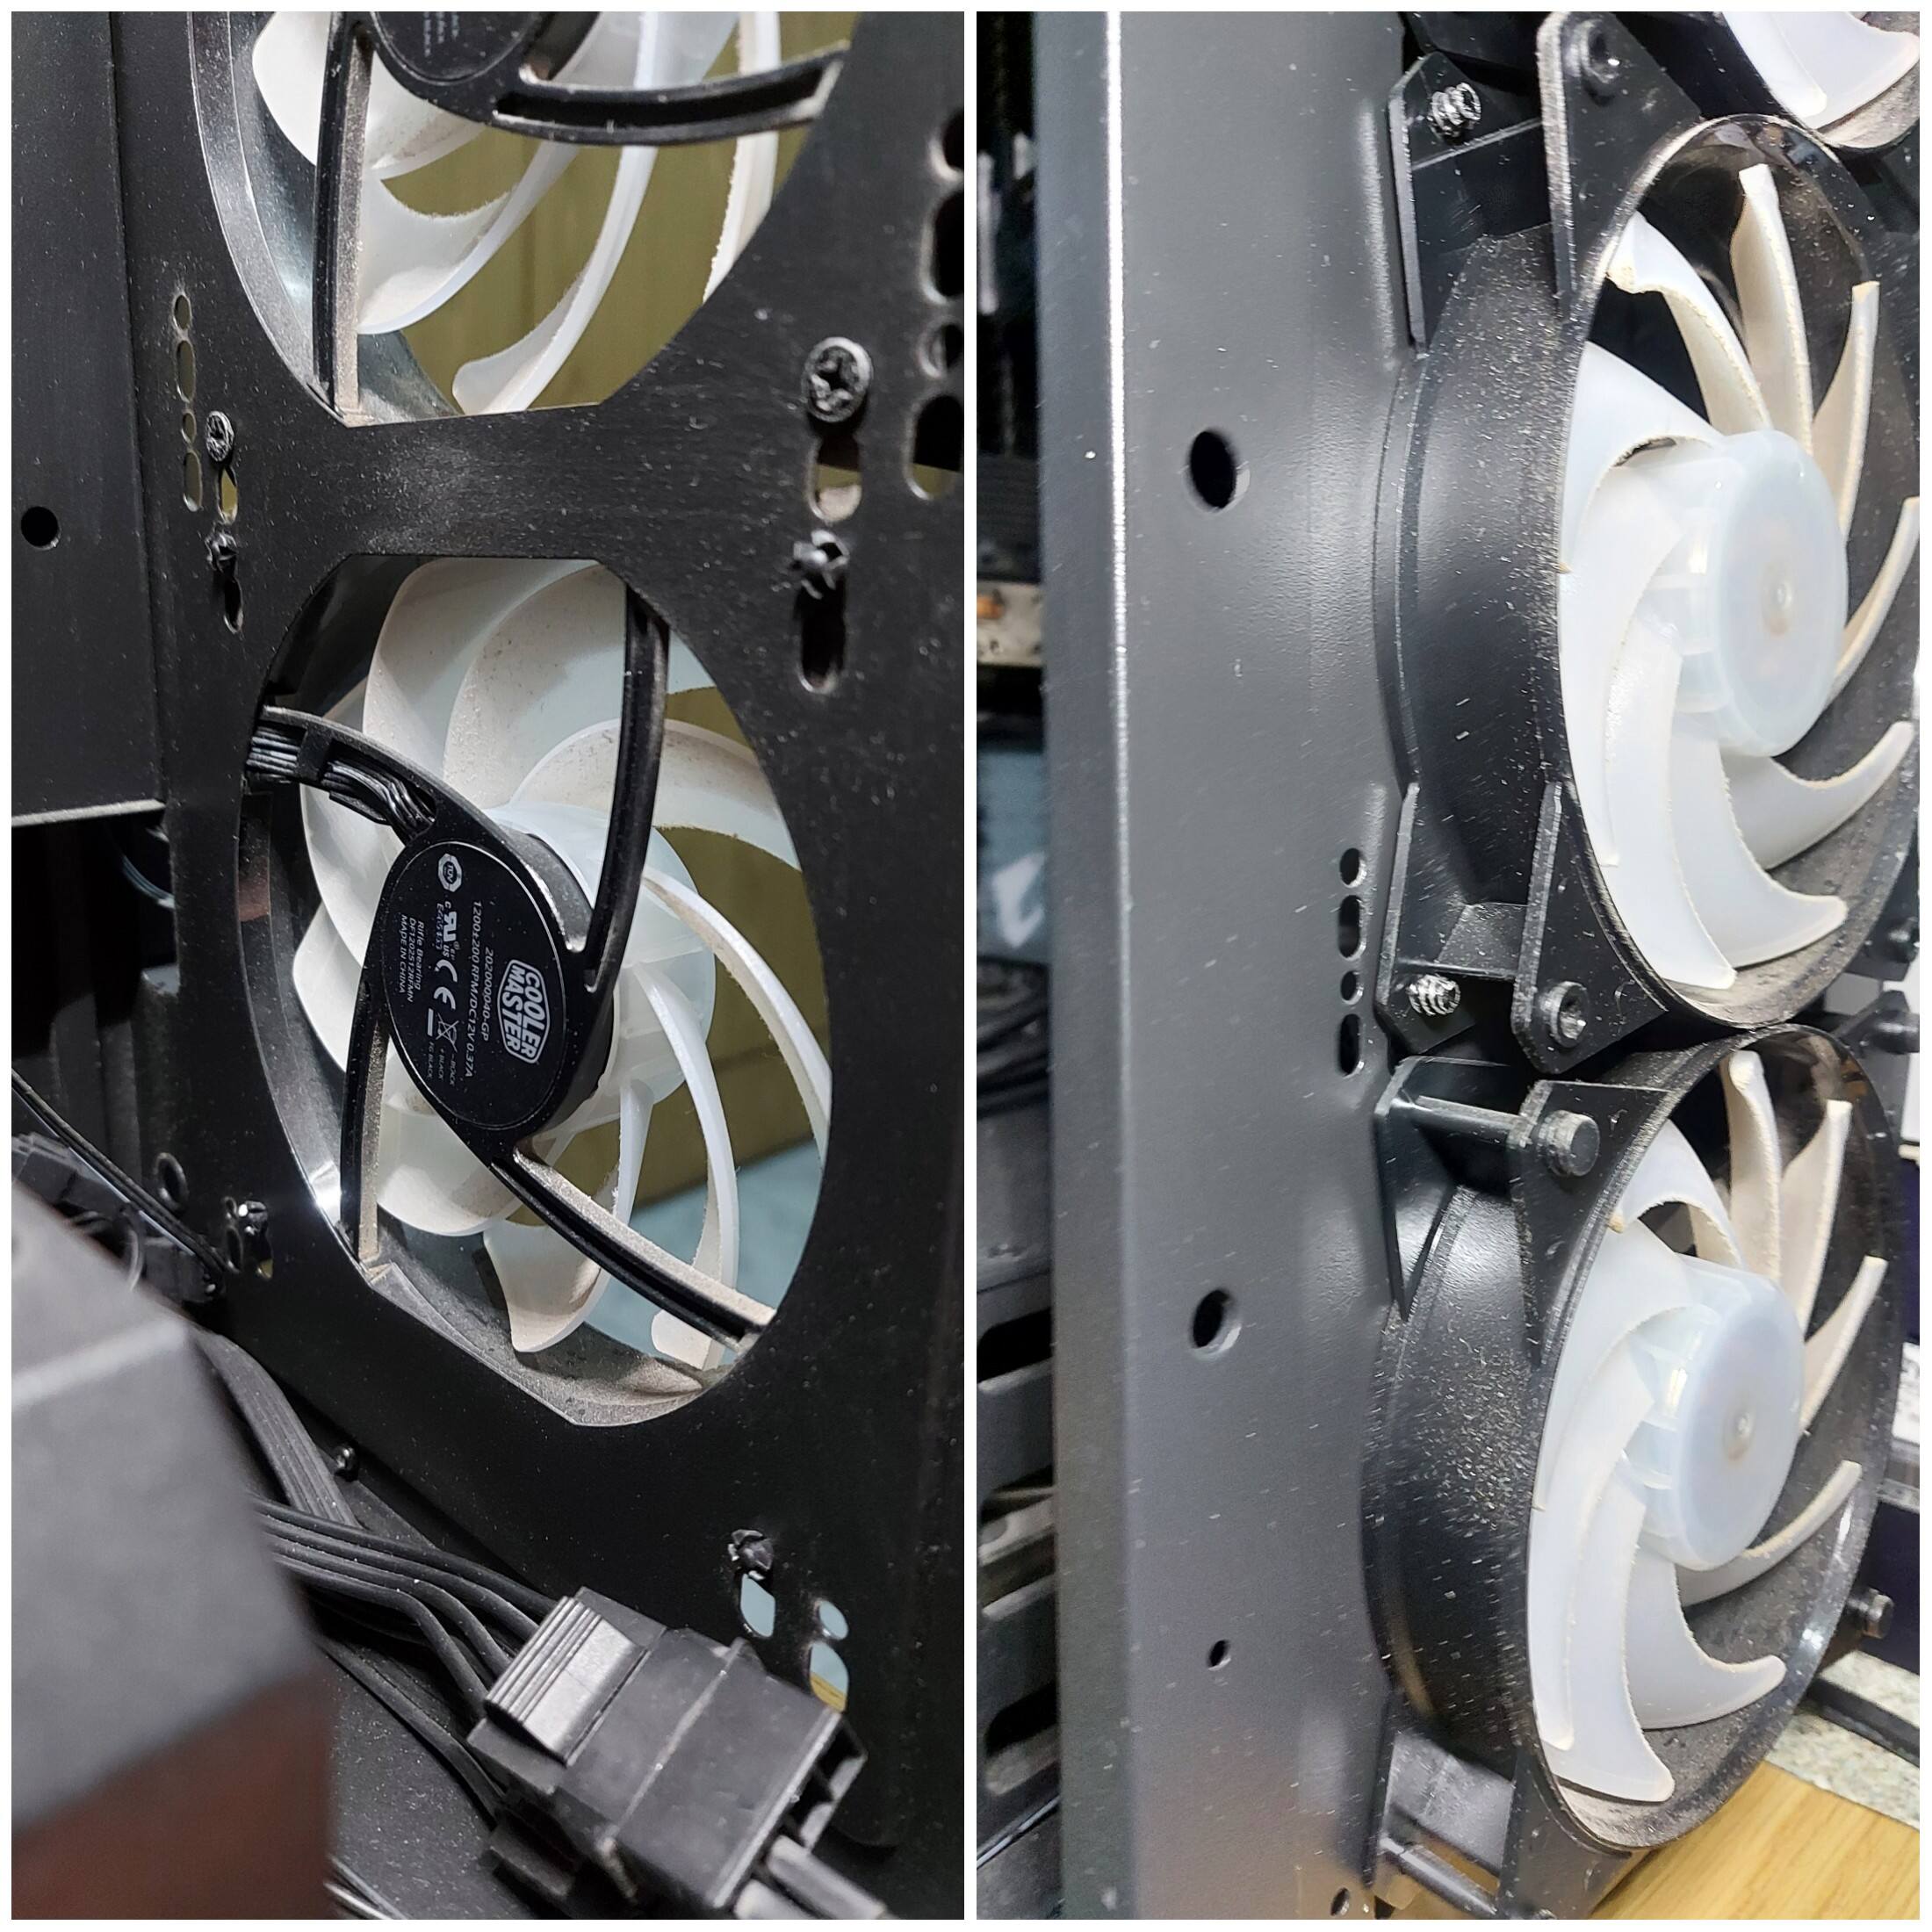 After my fan position post, with your suggestions i removed bottom left fan  and flipped top right fan as intake. My question is; should i remove the  top right fan? or flip